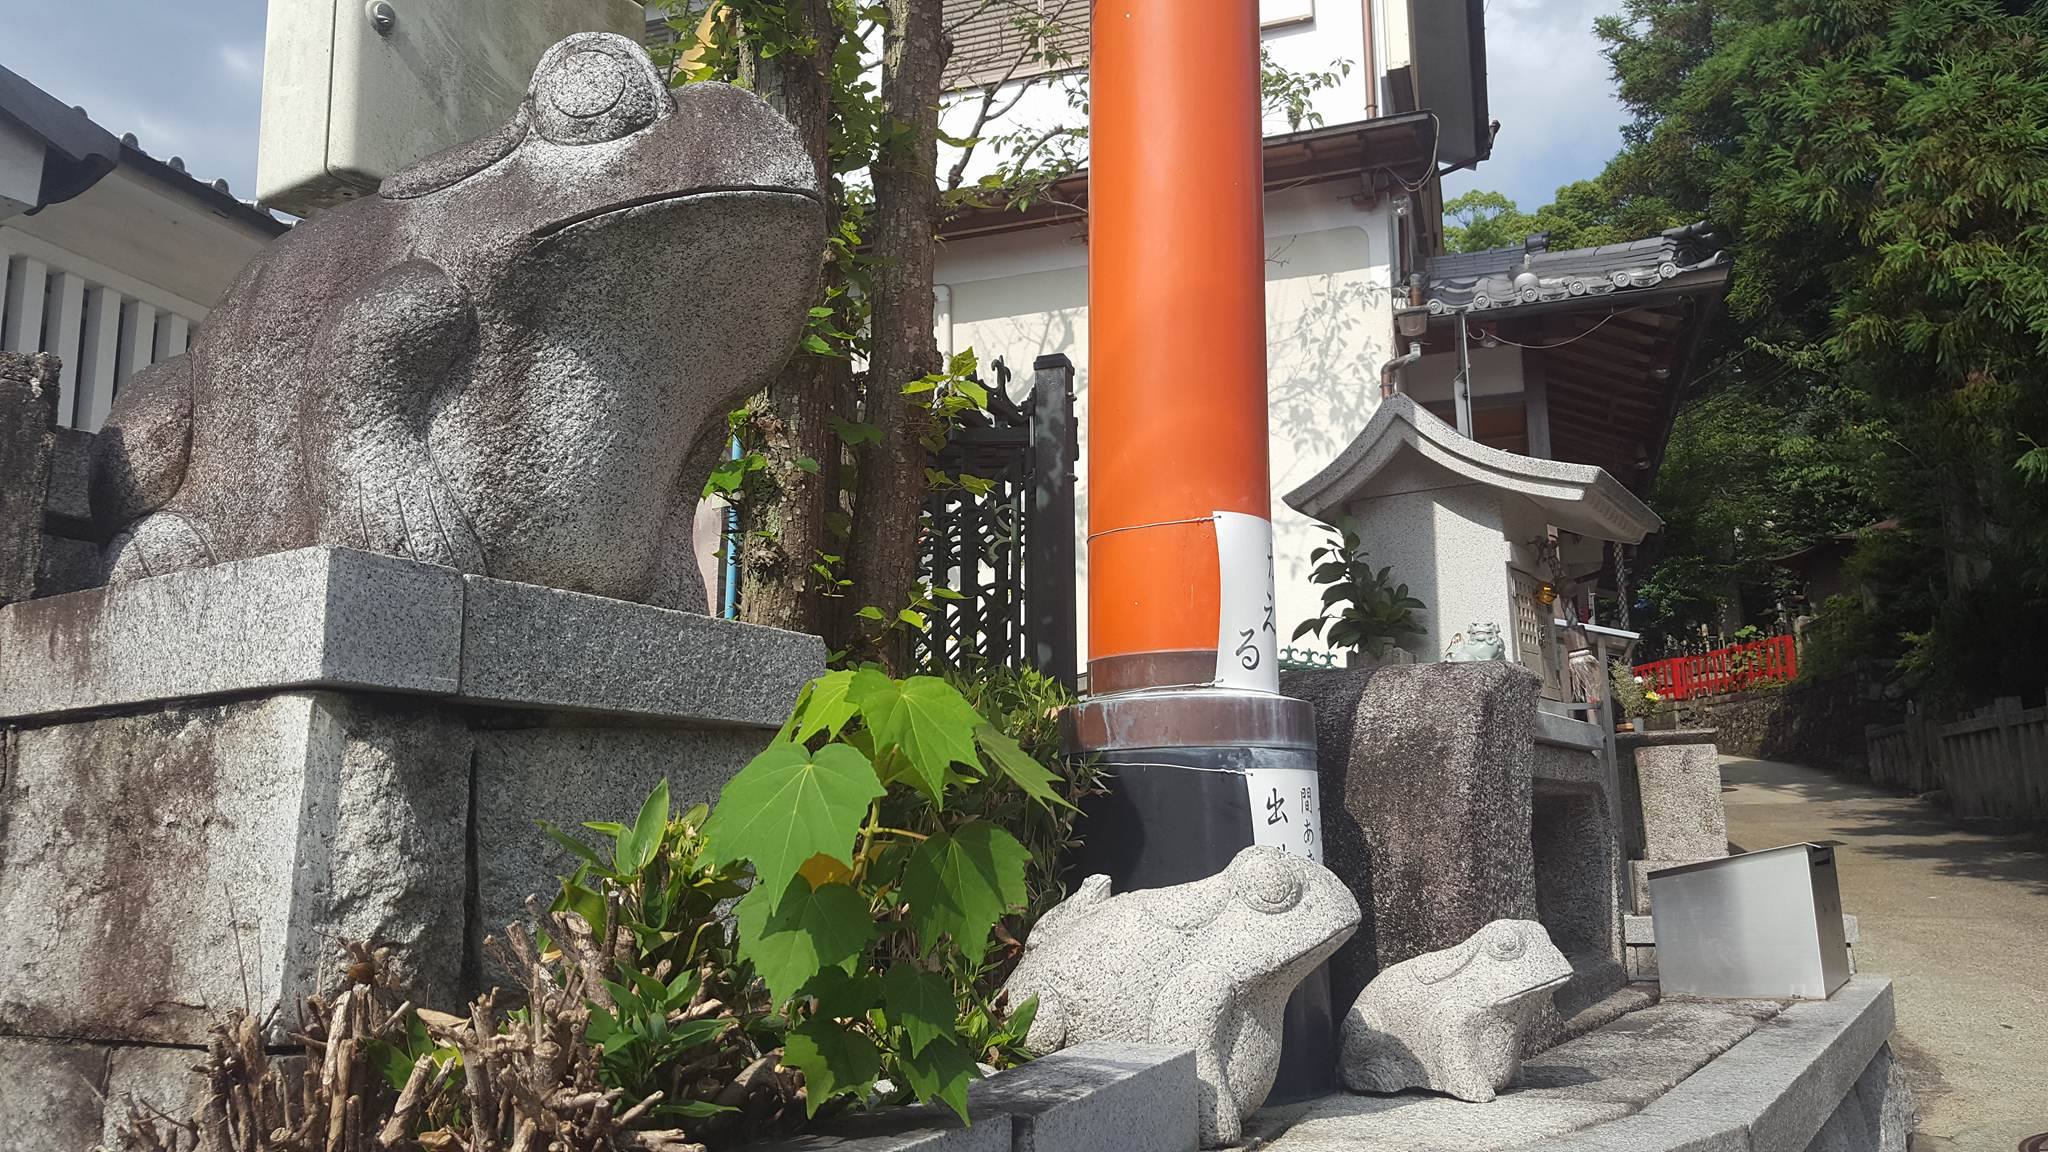 Some interesting frogs near a golden female Jizo statue. I'd like to know what this symbolism is all about. It's so interesting!